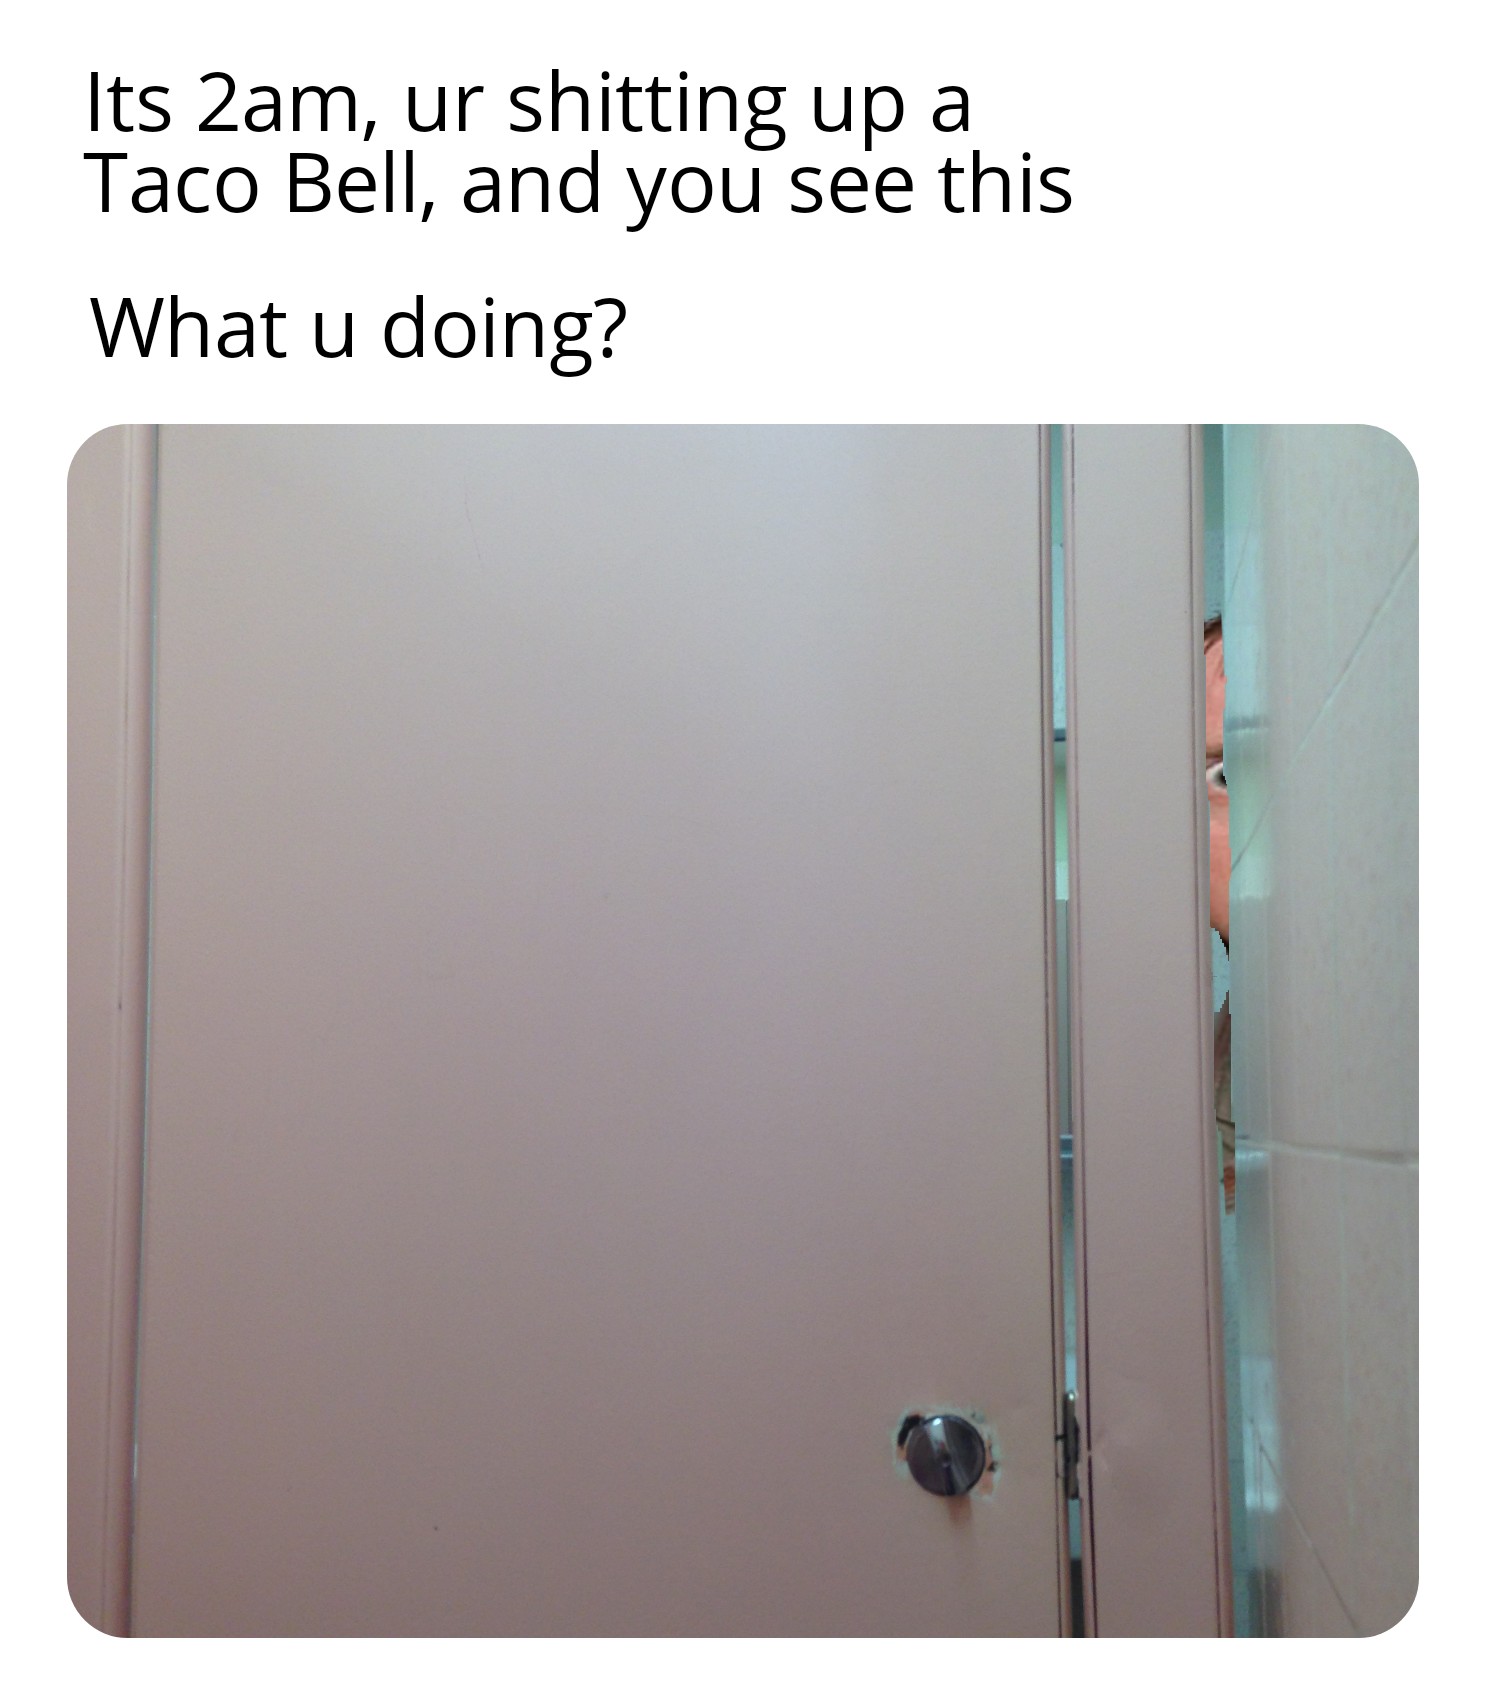 angle - Its 2am, ur shitting up a Taco Bell, and you see this What u doing?